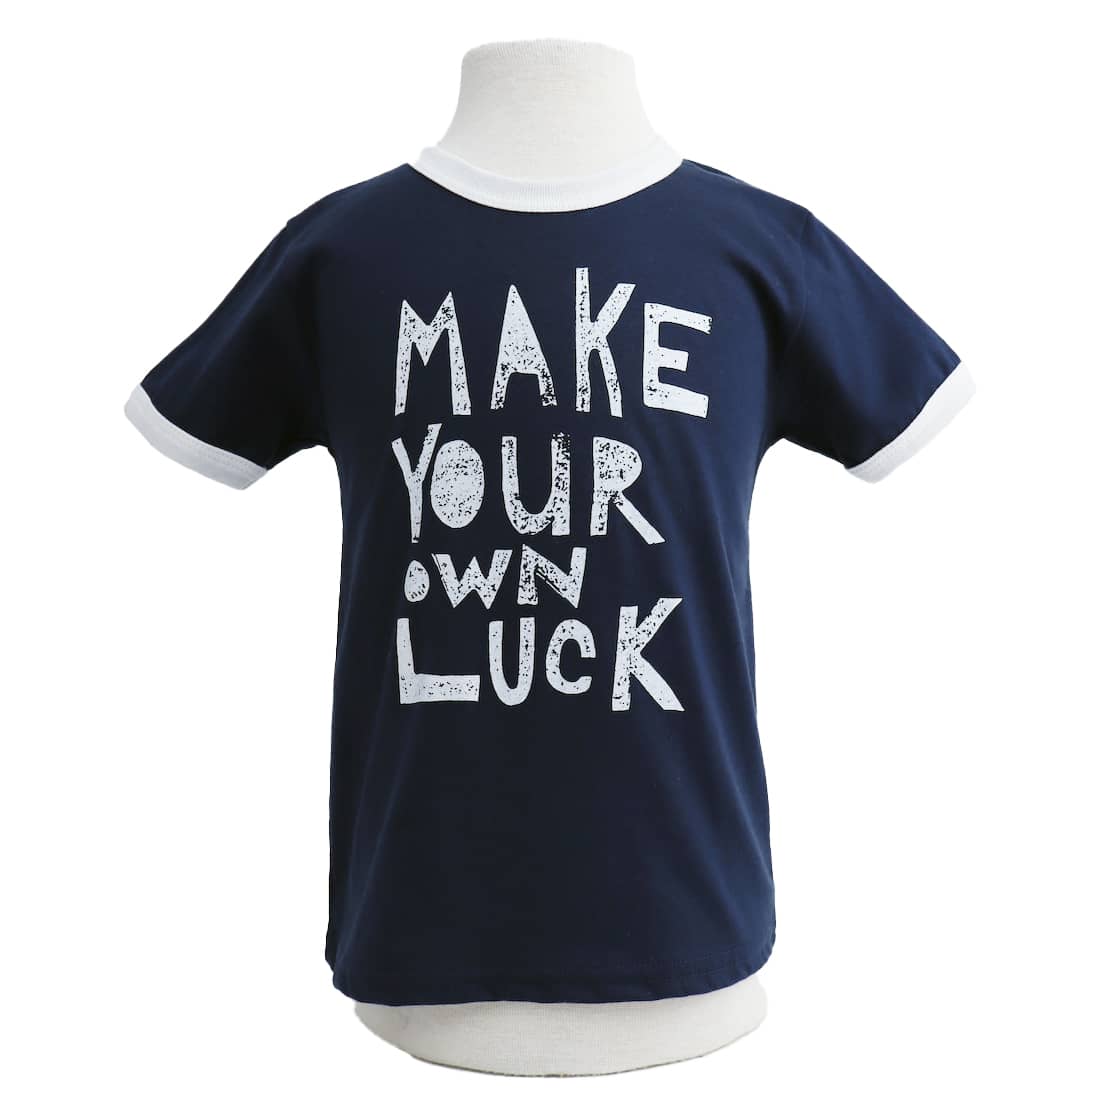 Make Your Own Luck Kid's Ringer Tee in Navy